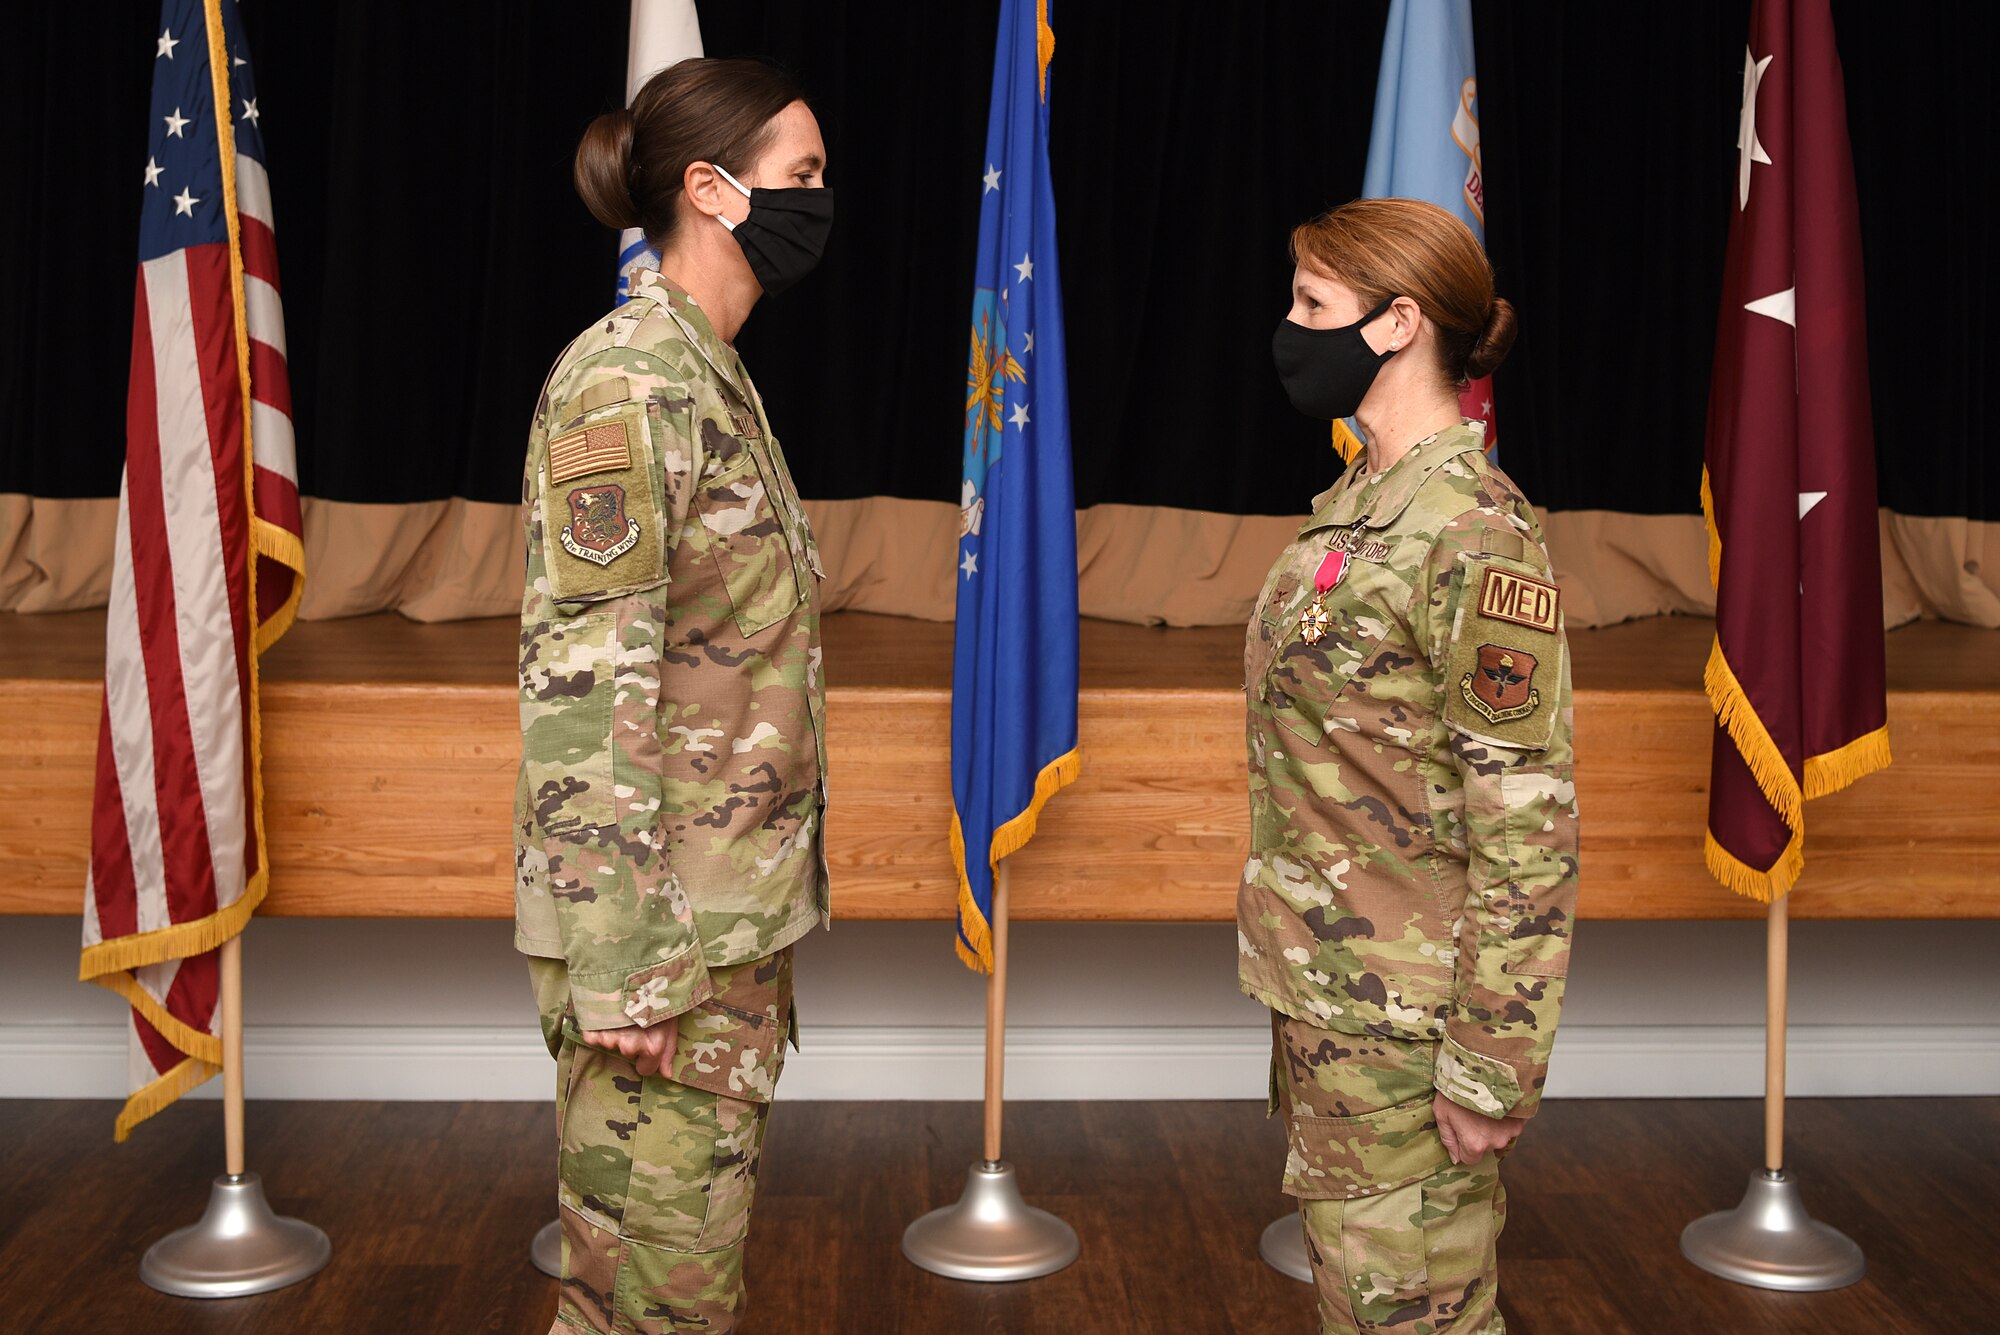 U.S. Air Force Col. Heather Blackwell, 81st Training Wing commander, presents the Legion of Merit to Col. Beatrice Dolihite, outgoing 81st Medical Group commander, inside the Don Wiley Auditorium at Keesler Air Force Base, Mississippi, July 21, 2020. Dolihite relinquished command to Col. Christopher Estridge, incoming 81st MDG commander. (U.S. Air Force photo by Senior Airman Suzie Plotnikov)